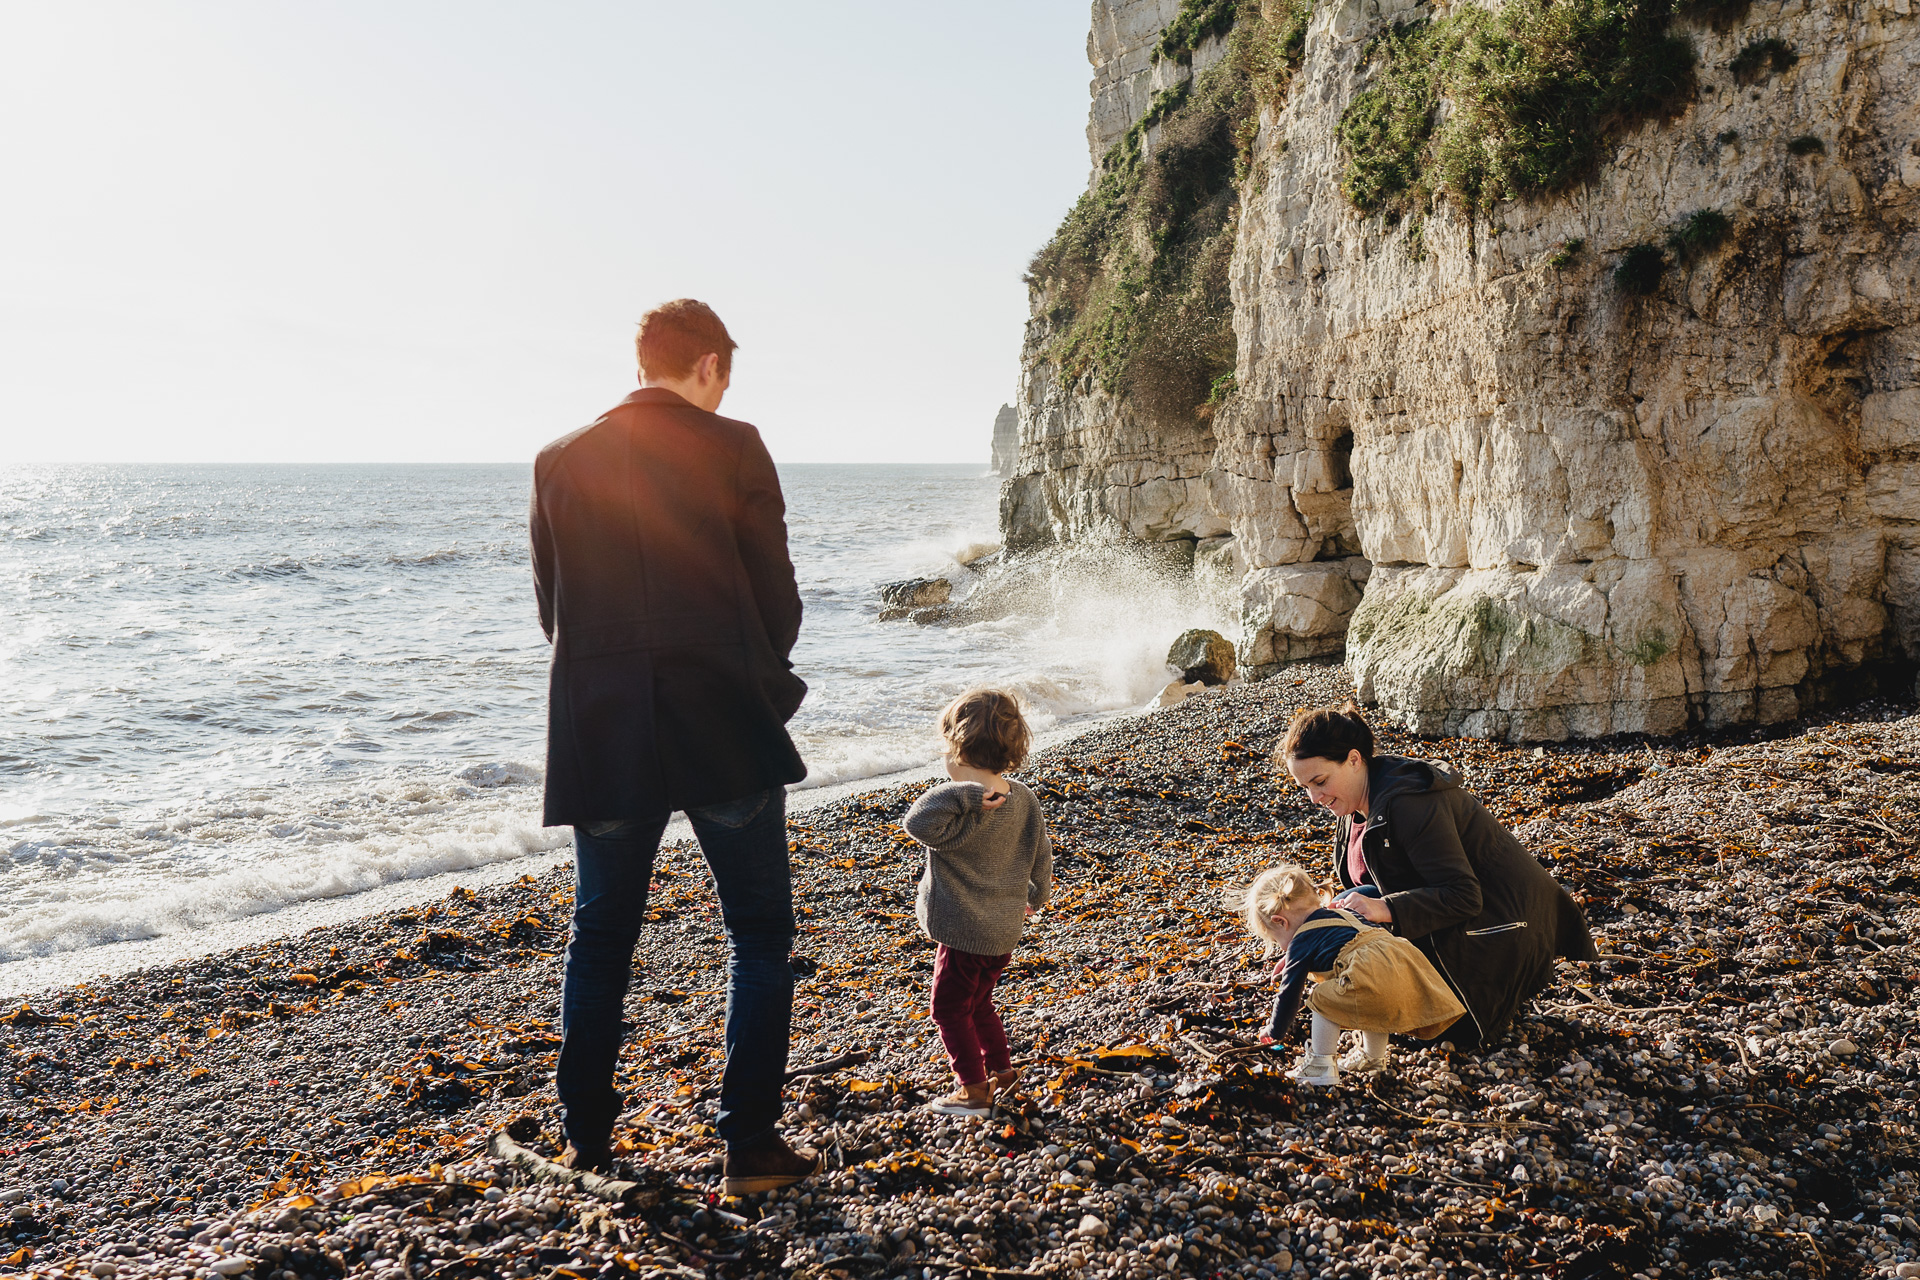 A family with young children on a beach throwing stones into the sea